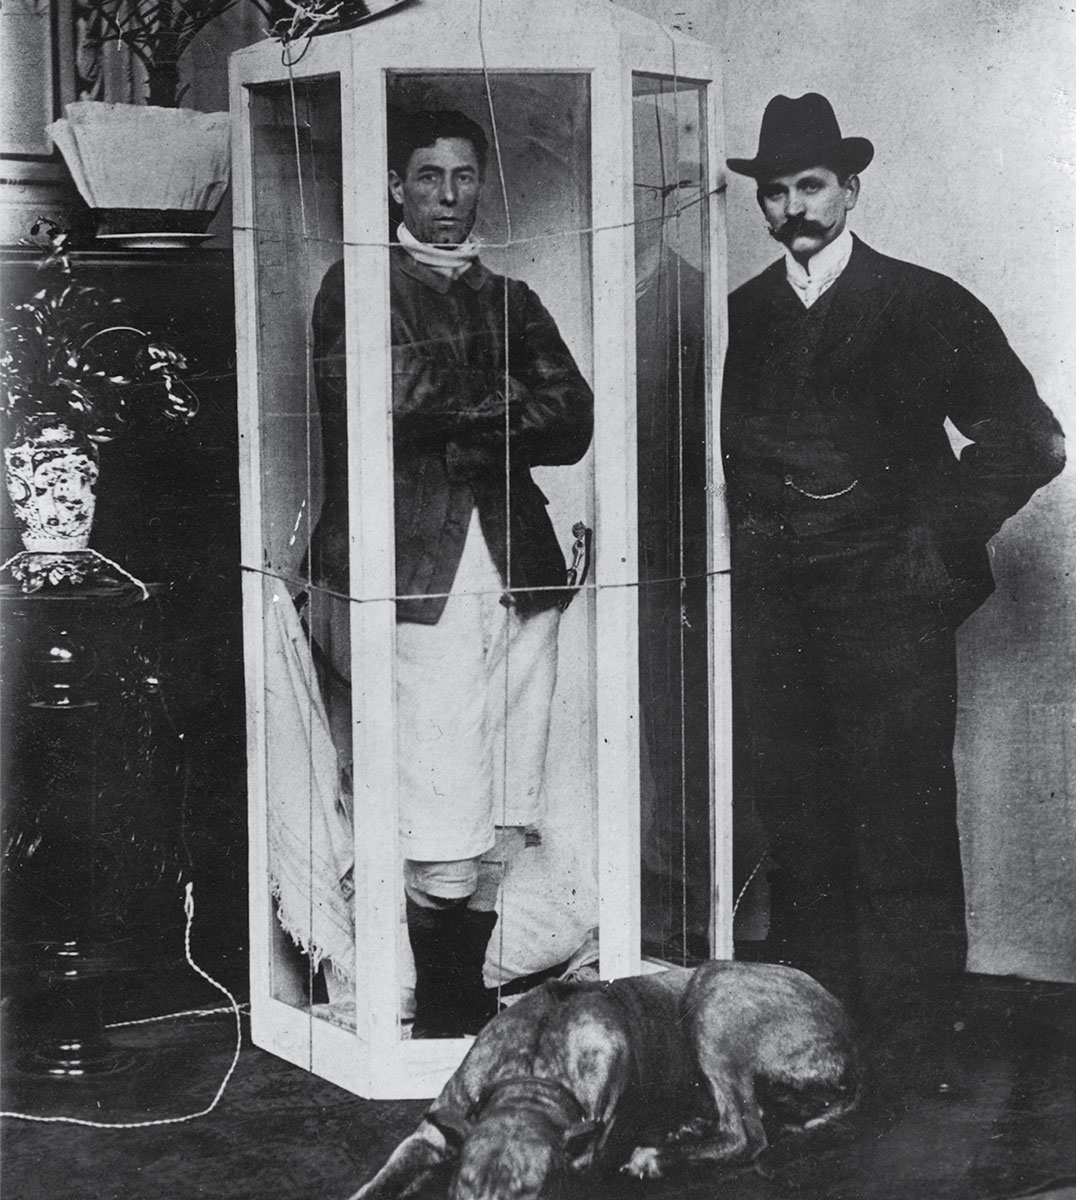 A photograph of hunger artist Papus, who was active around the turn of the twentieth century, in his sealed glass box at the Passage-Panoptikum in Berlin.